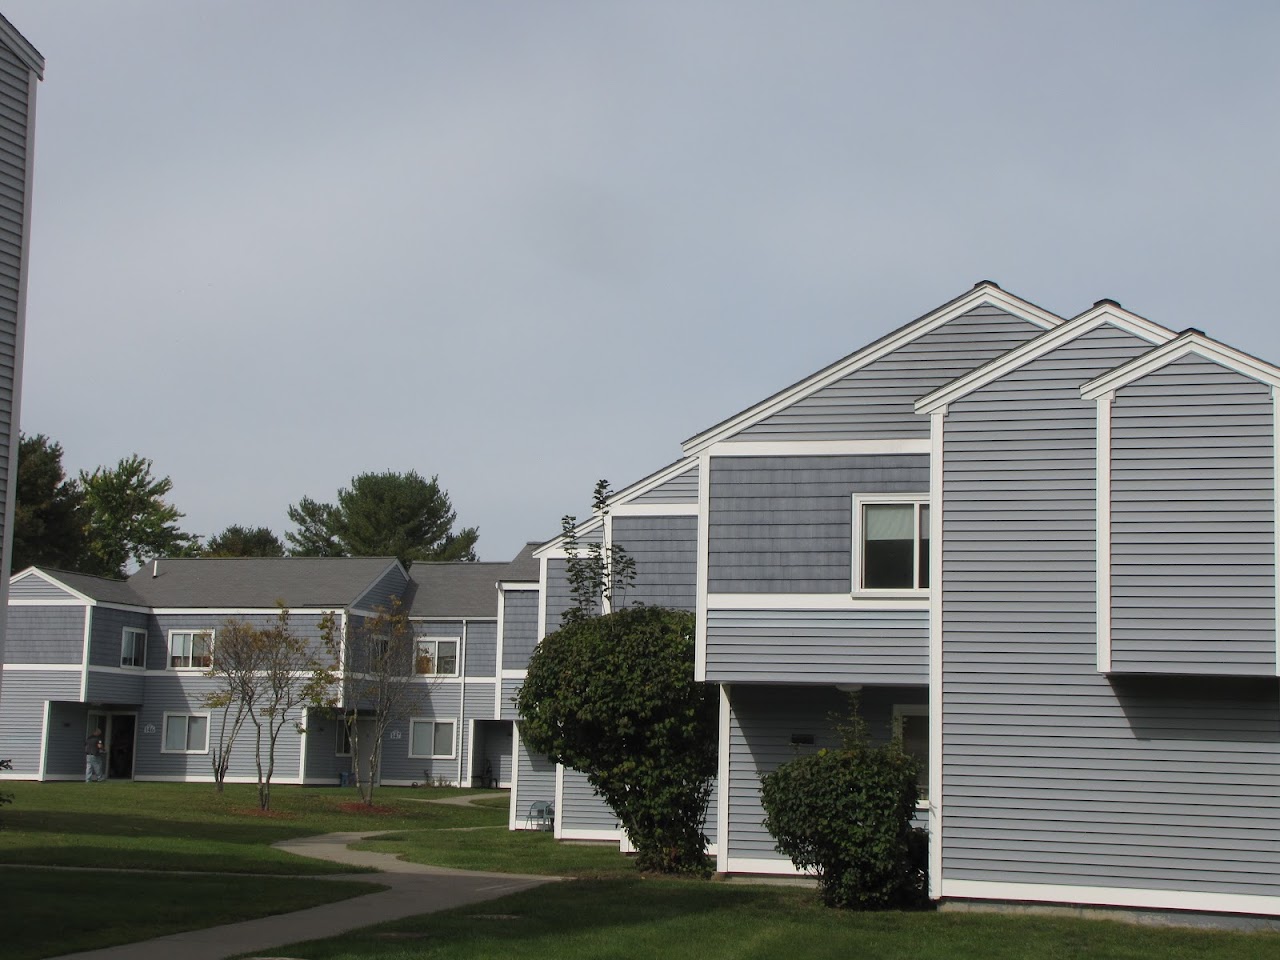 Photo of ORCHARD HILL. Affordable housing located at 165 SUTTON AVE OXFORD, MA 01540